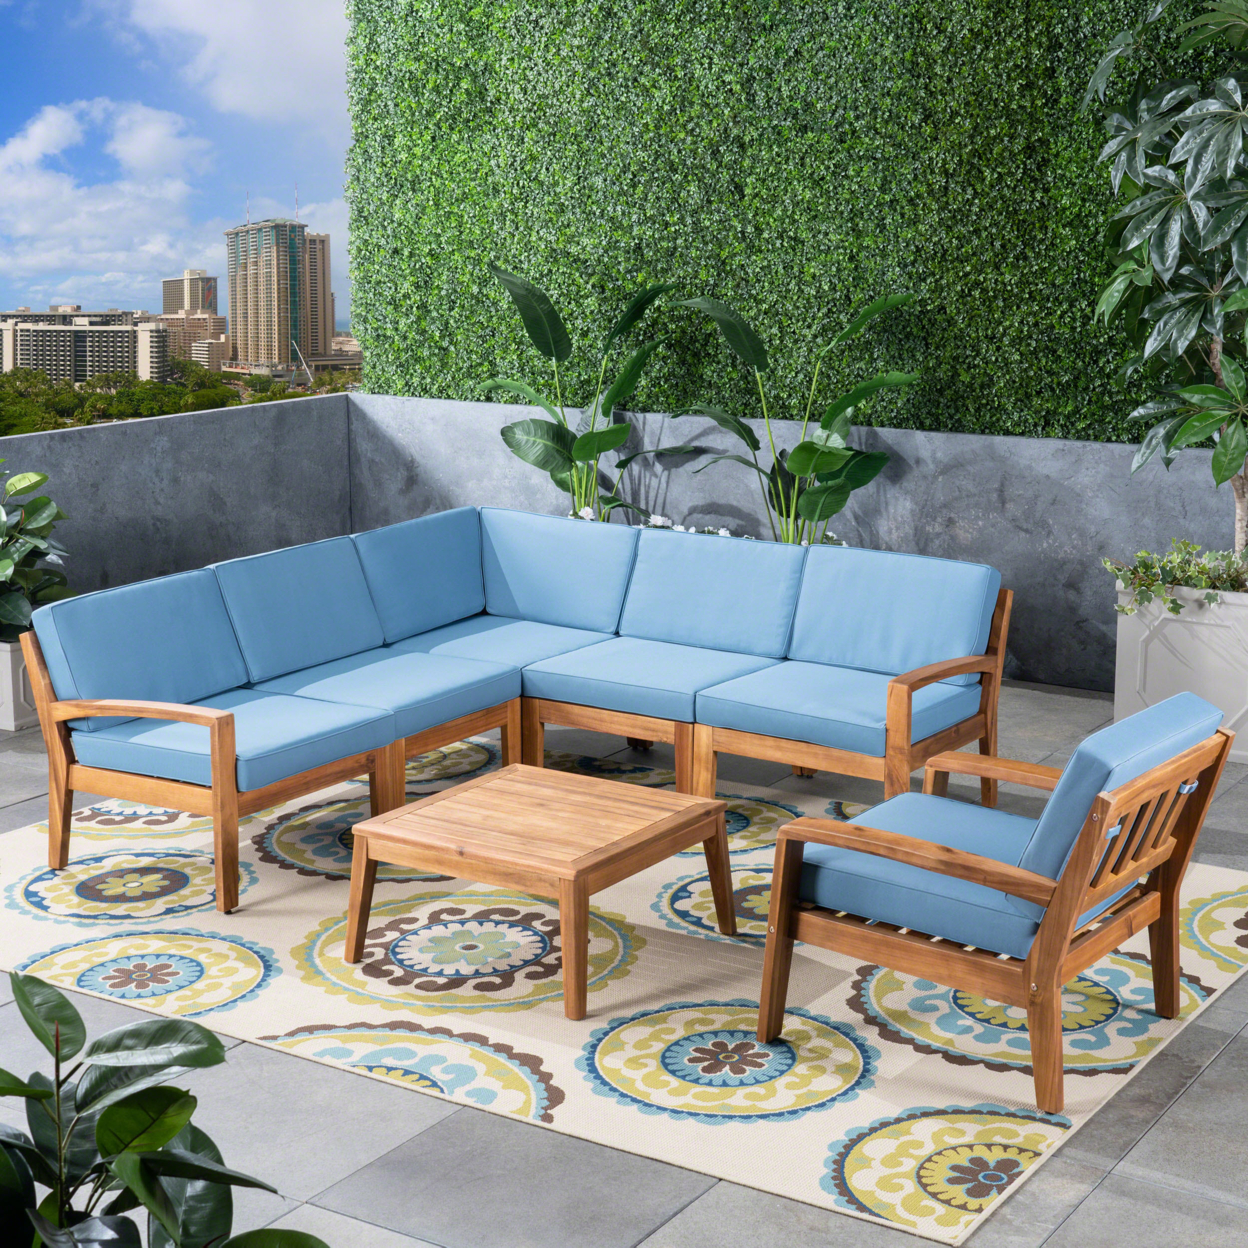 Amaryllis Outdoor Acacia Wood 6 Seater Sectional Sofa And Club Chair Set With Coffee Table - Teak/Blue